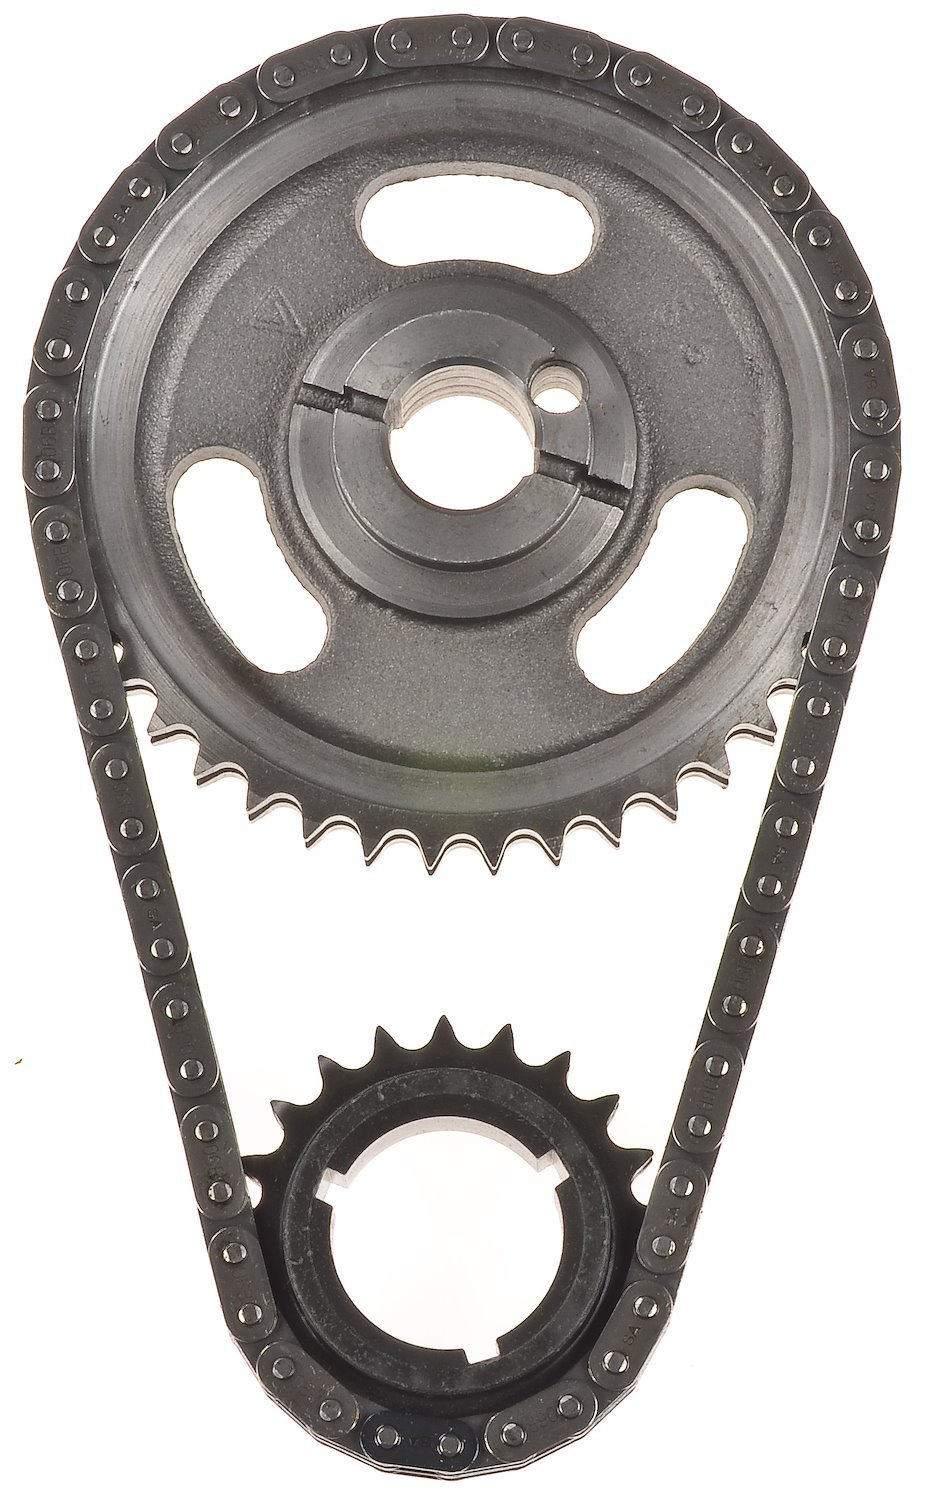 Timing Chain Set for 1972-2002 Small Block Ford